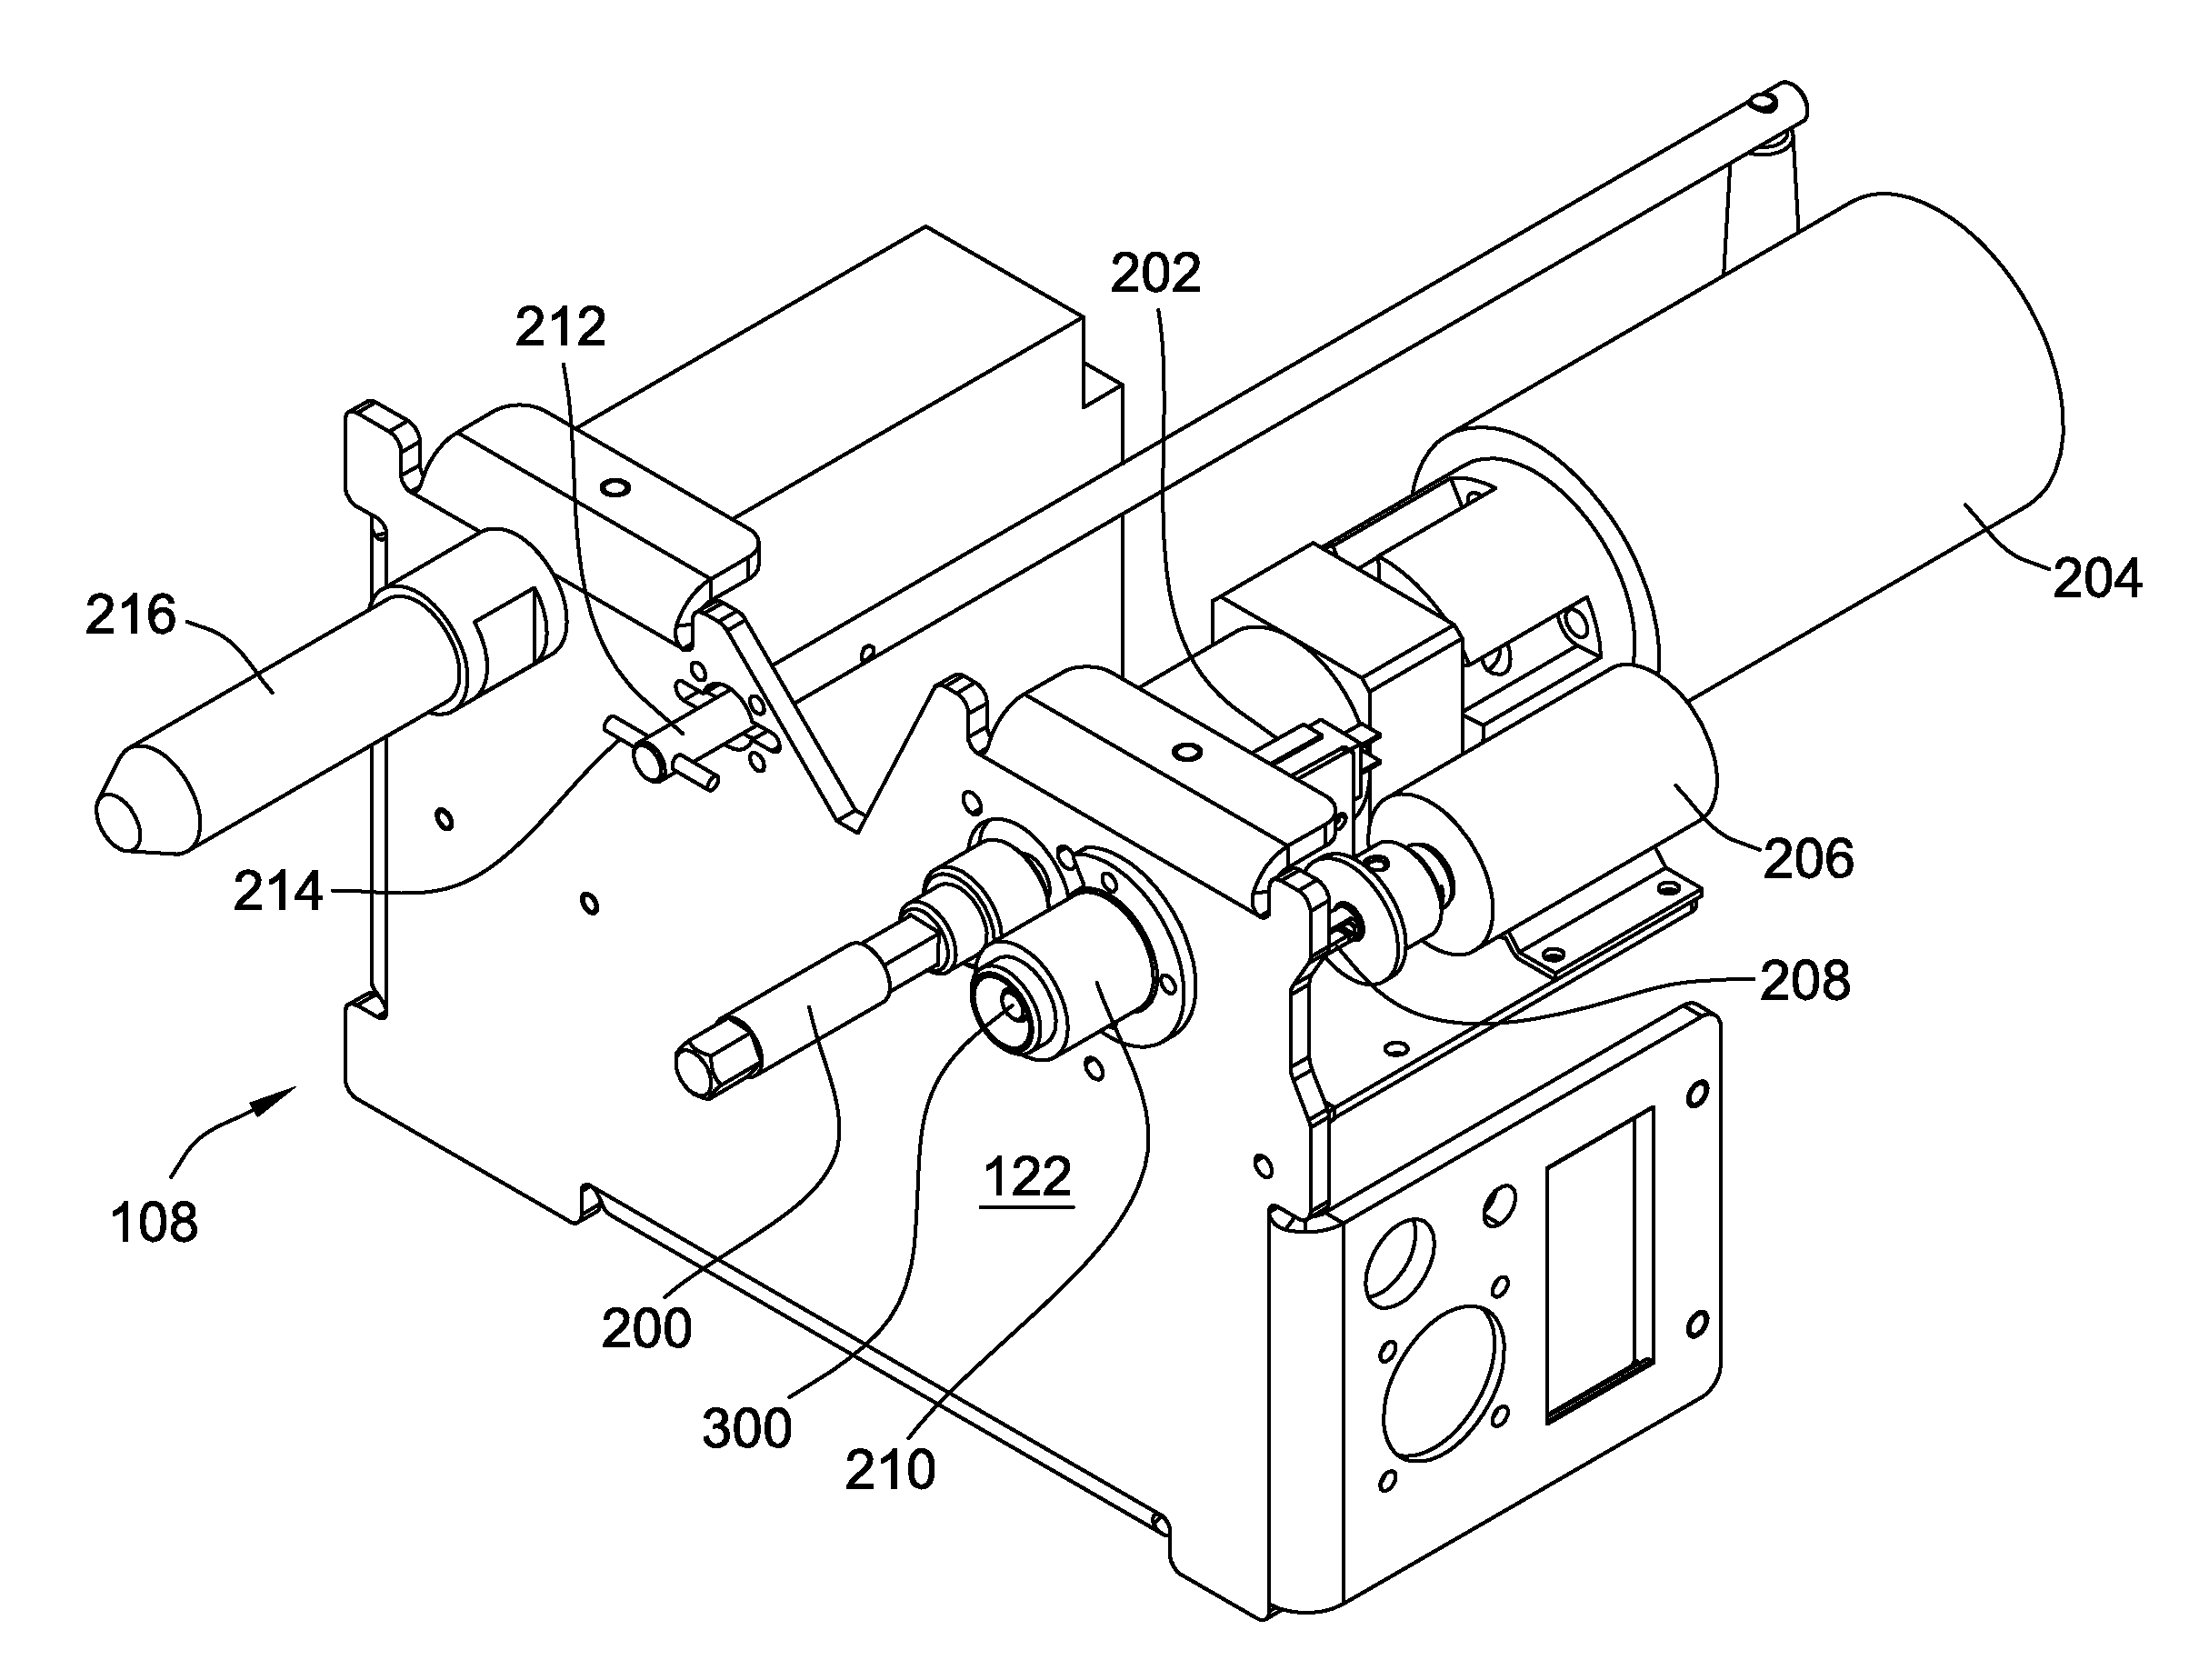 Portable remote racking device for a circuit breaker